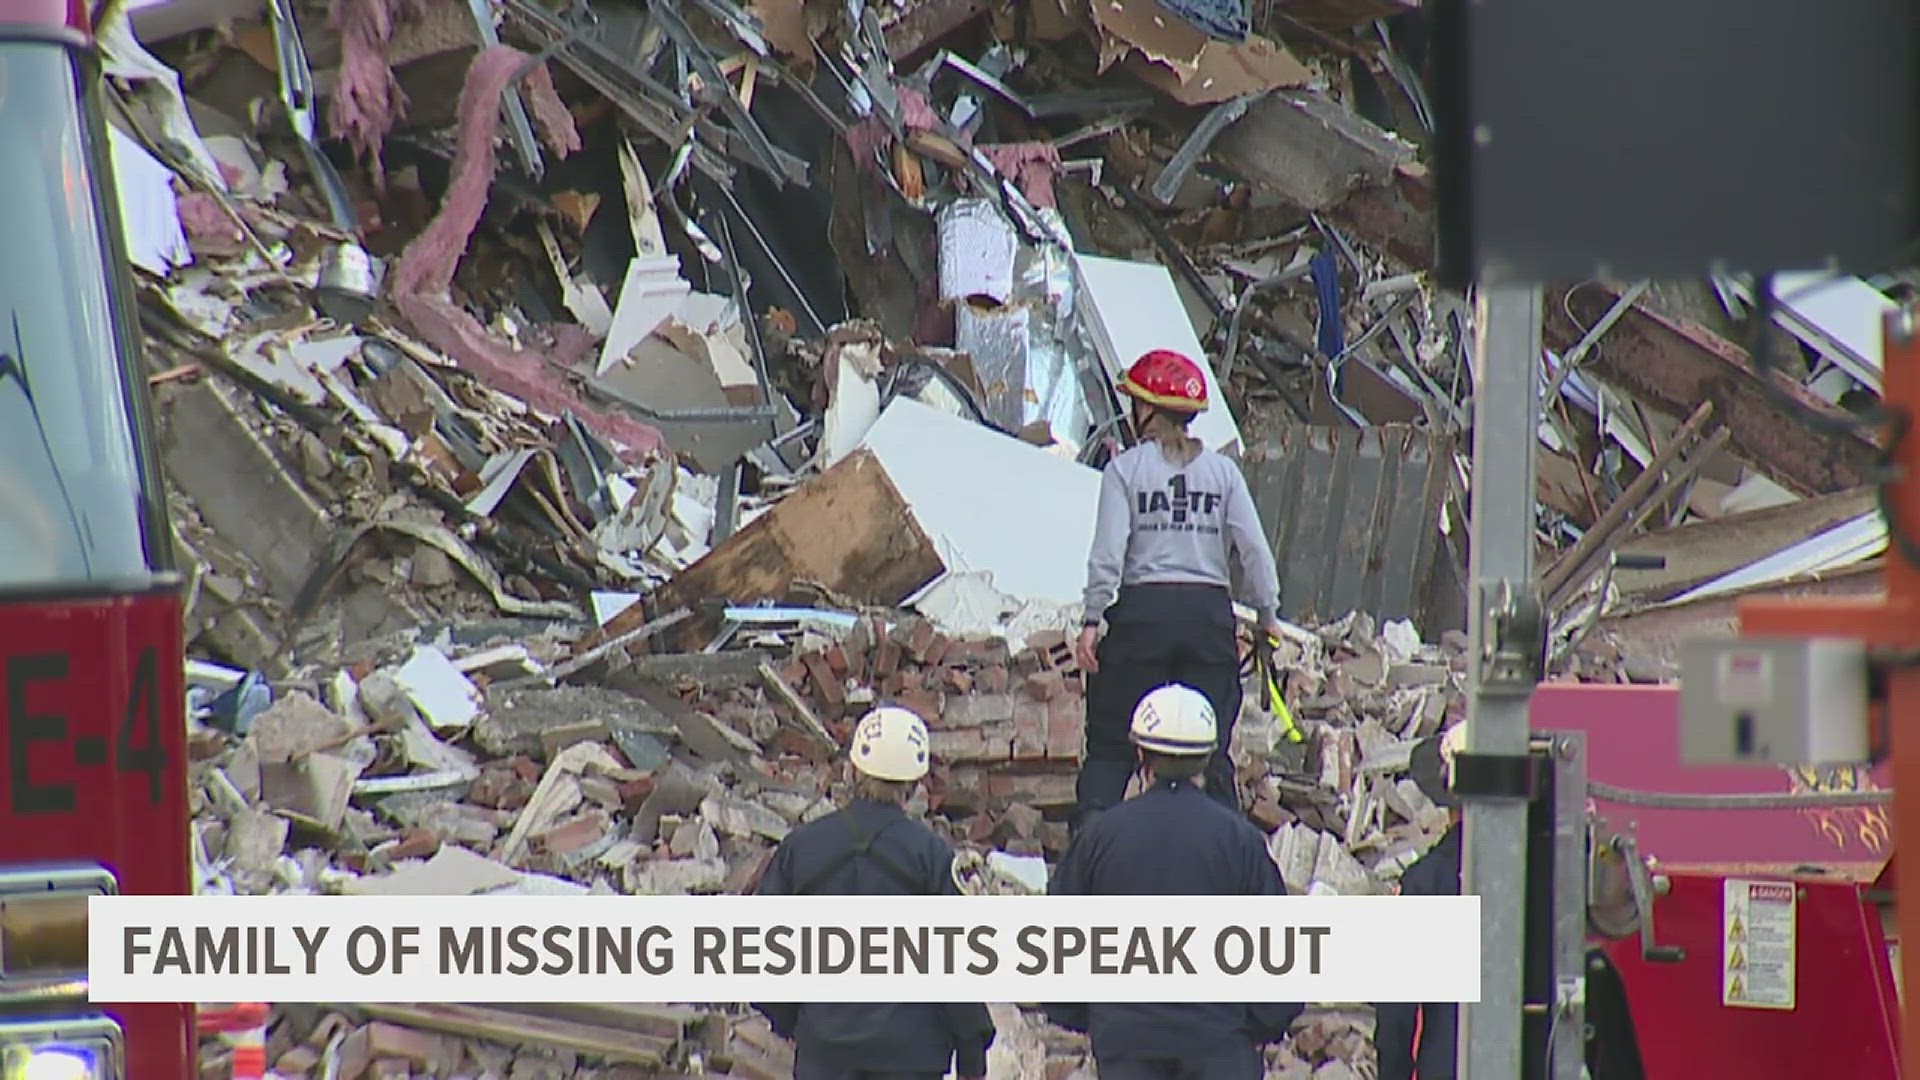 During a Tuesday press conference from the City of Davenport, it was announced that five people remain unaccounted for, two of whom are most likely in the rubble.